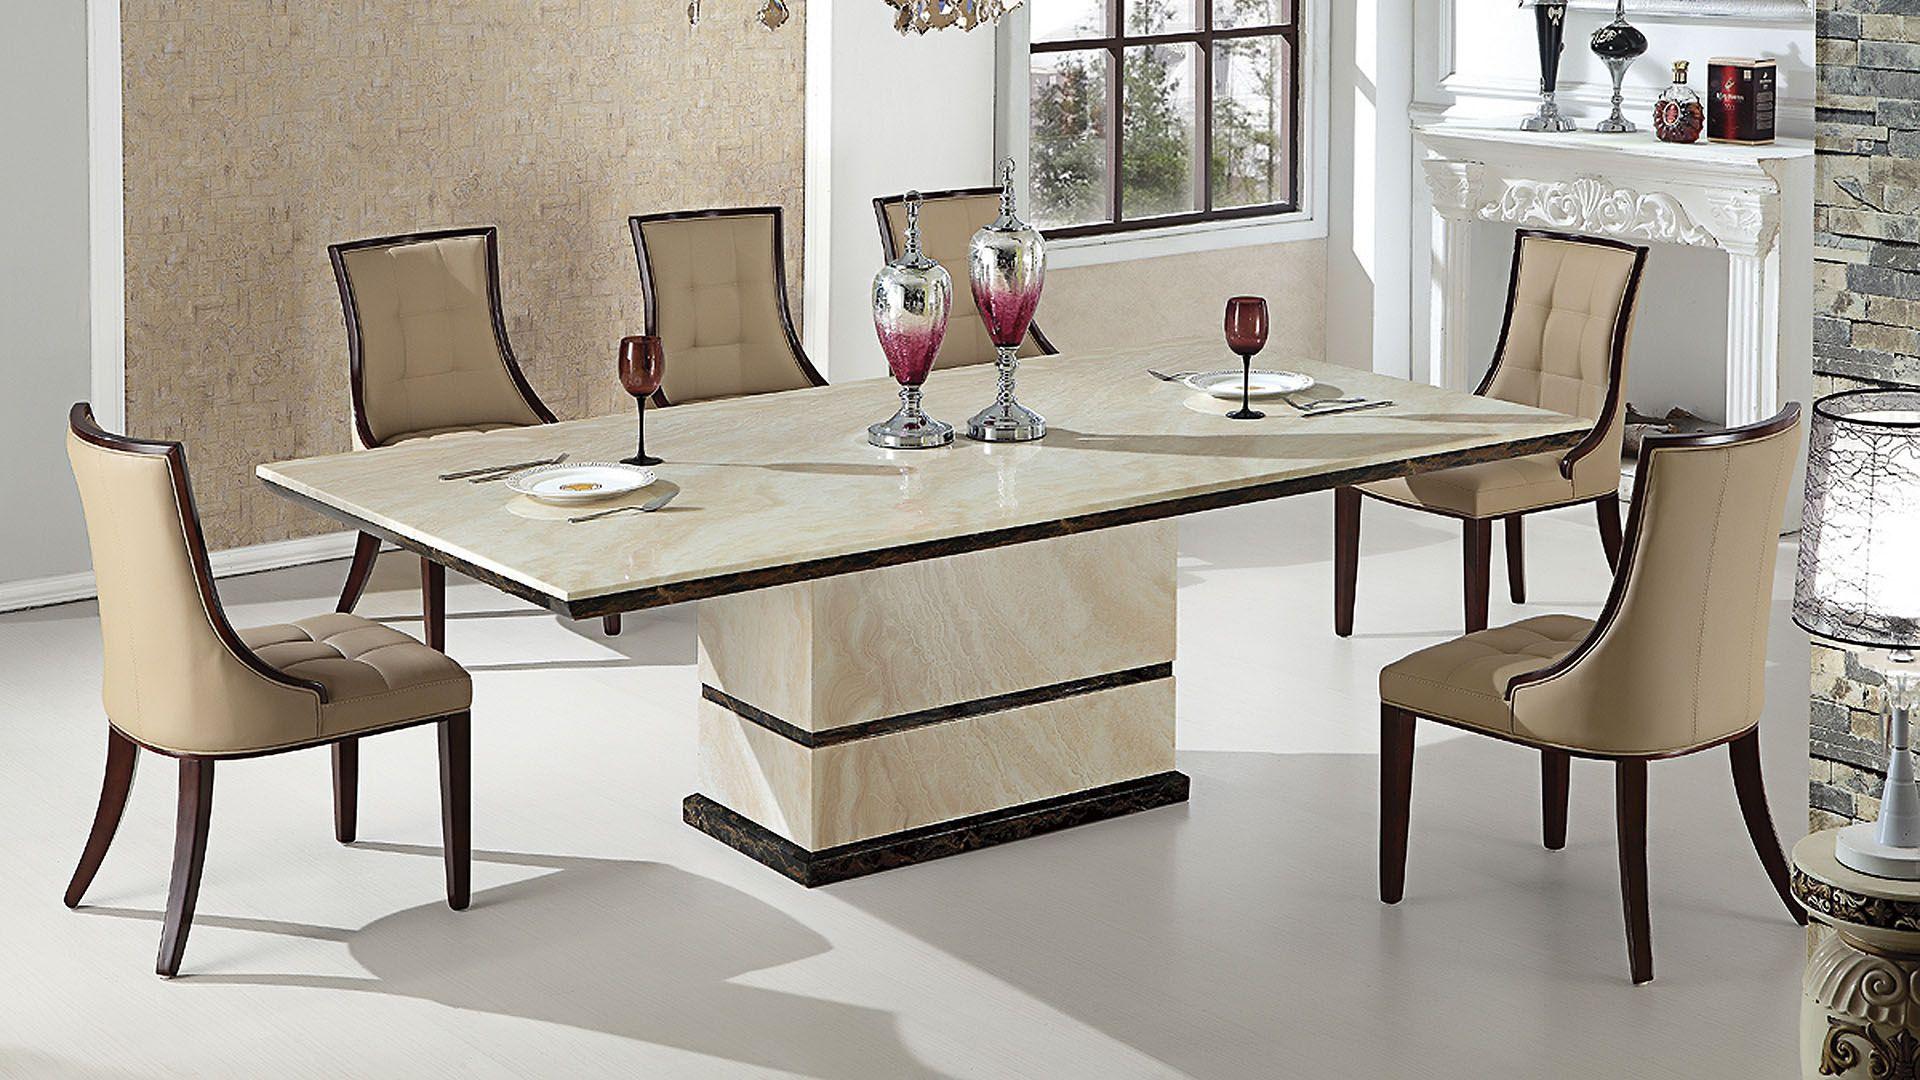 Modern Dining Table Set DT-H28 / CK-H603-TAN DT-H28-7PC in Tan, Beige PU